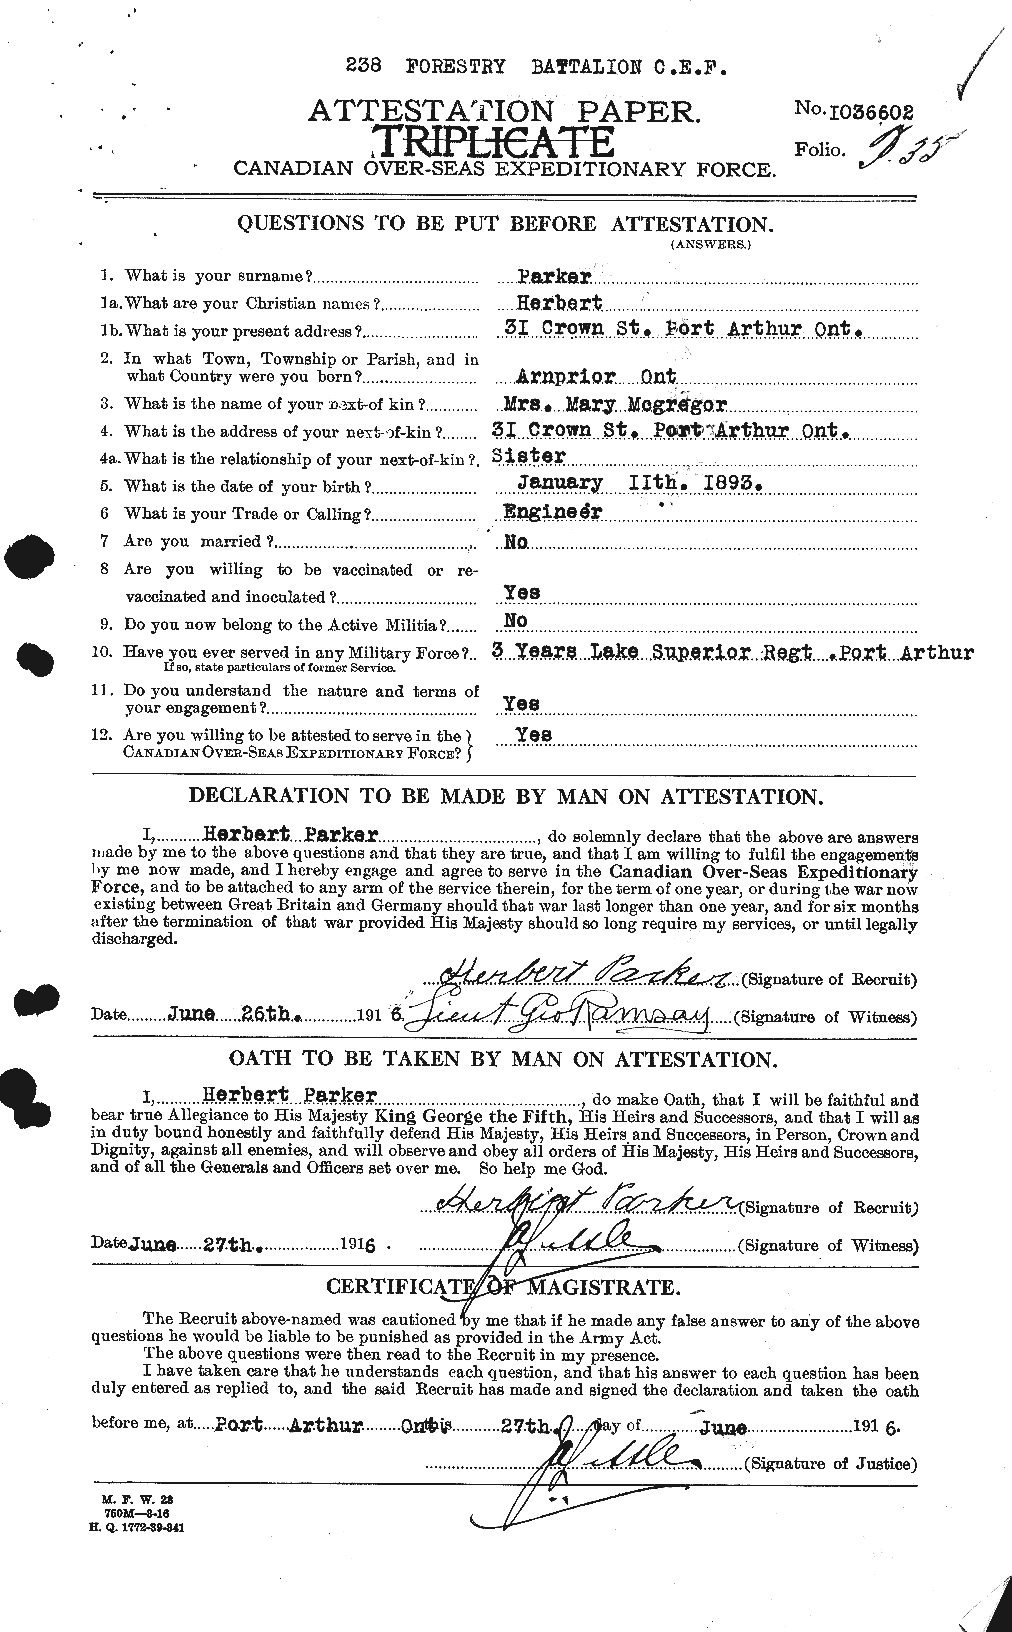 Personnel Records of the First World War - CEF 565367a